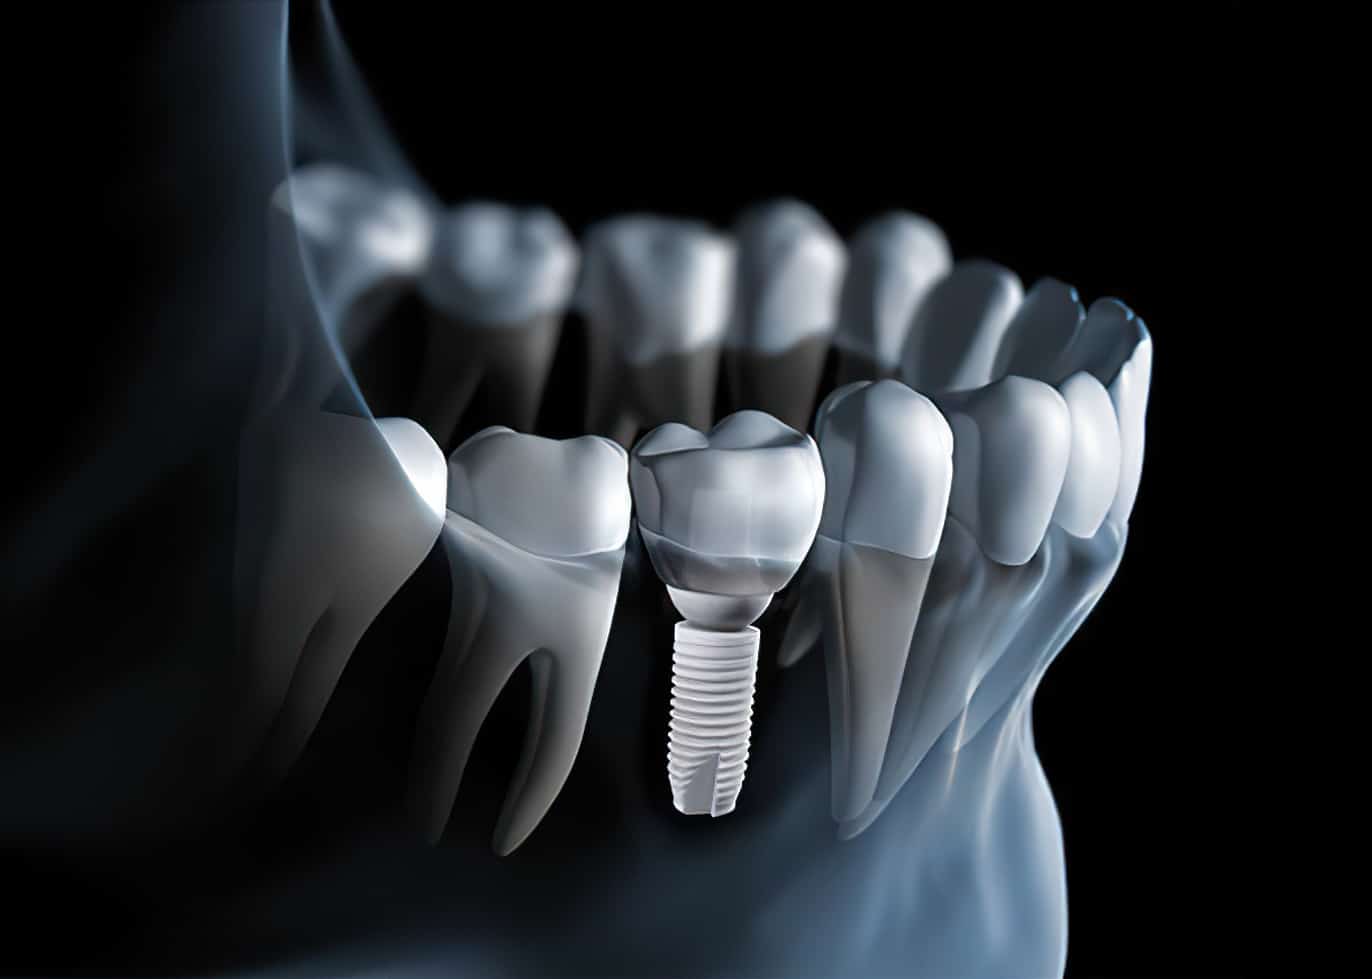 A metal-free zirconium dental implant, showcasing advanced technology for natural-looking and biocompatible tooth replacement.